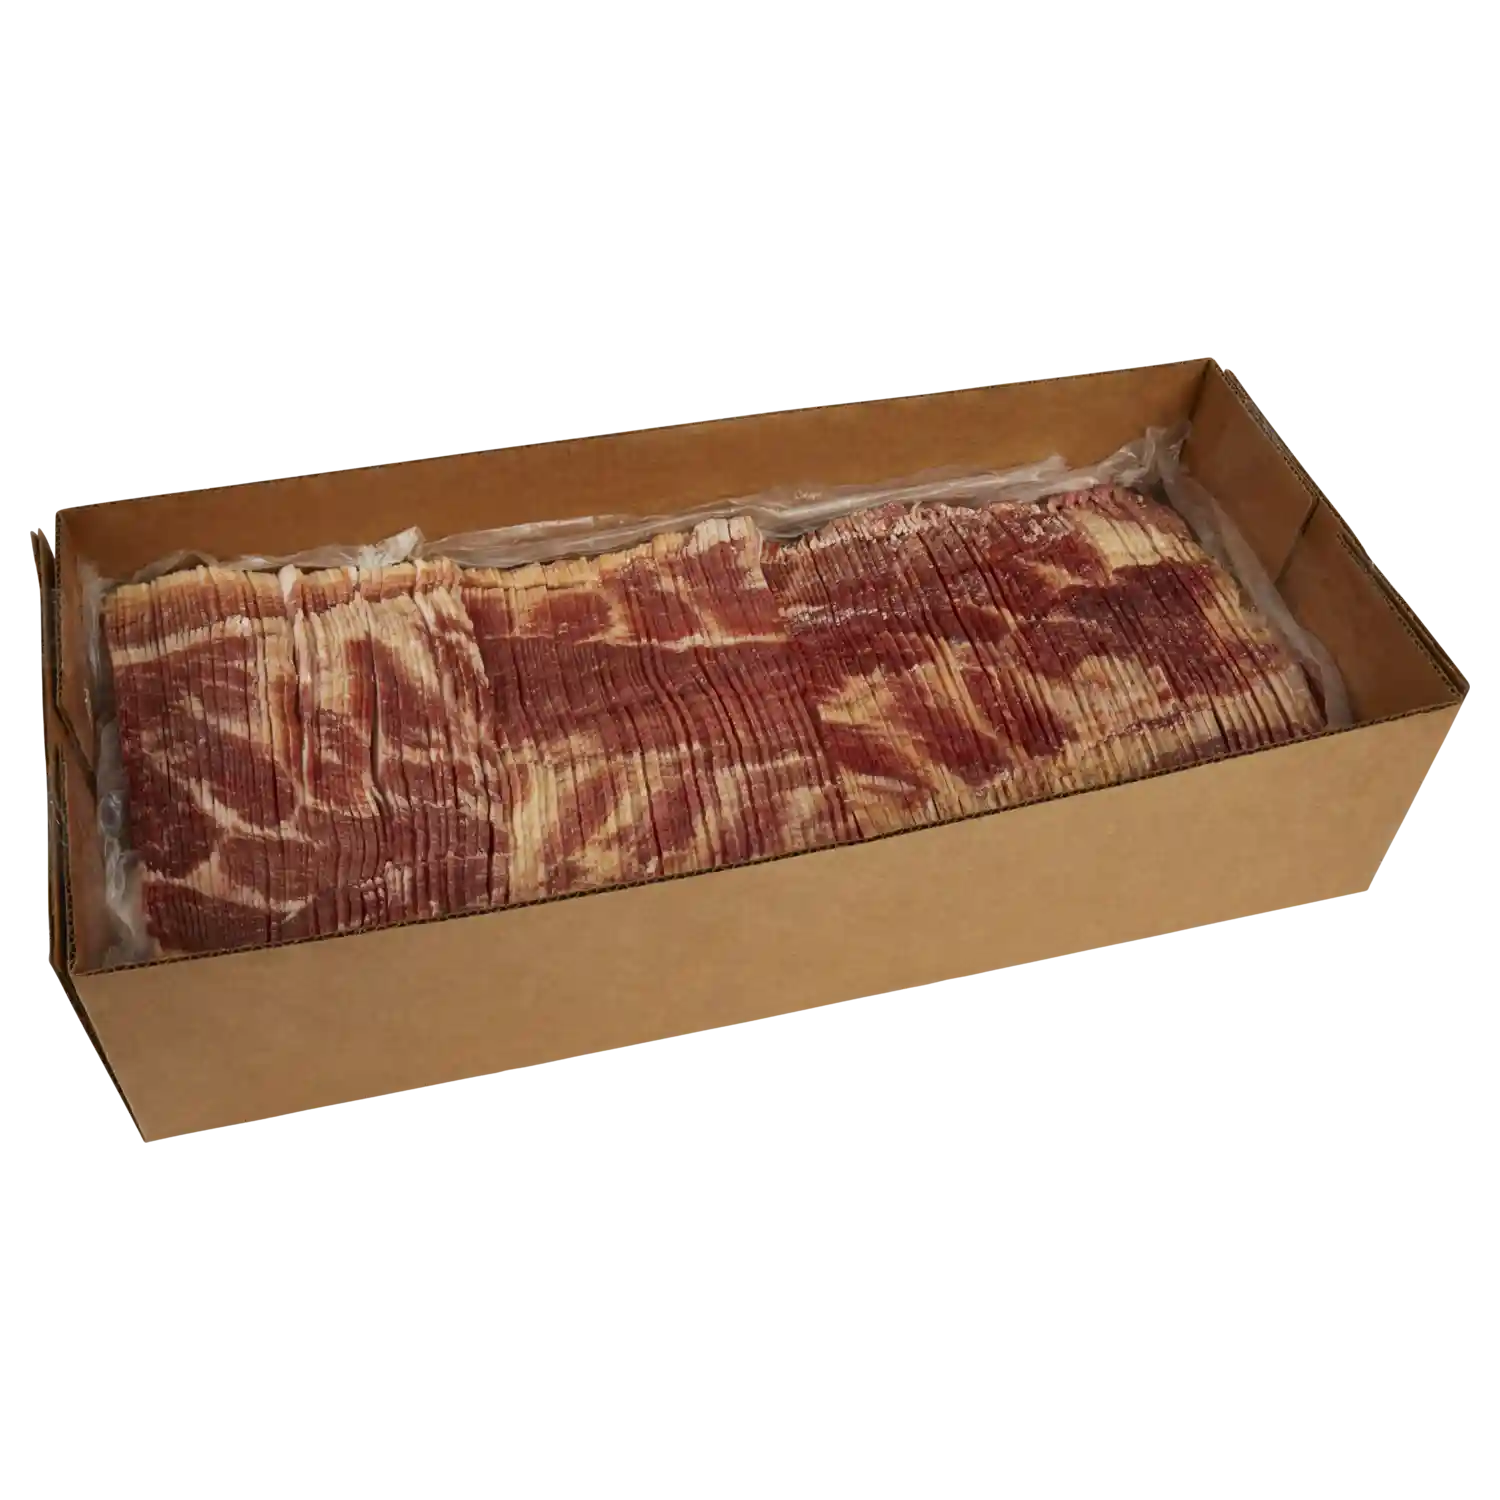 Wright® Brand Naturally Hickory Smoked Regular Sliced Bacon, Bulk, 30 Lbs, 14-18 Slices per Pound, Frozen_image_41